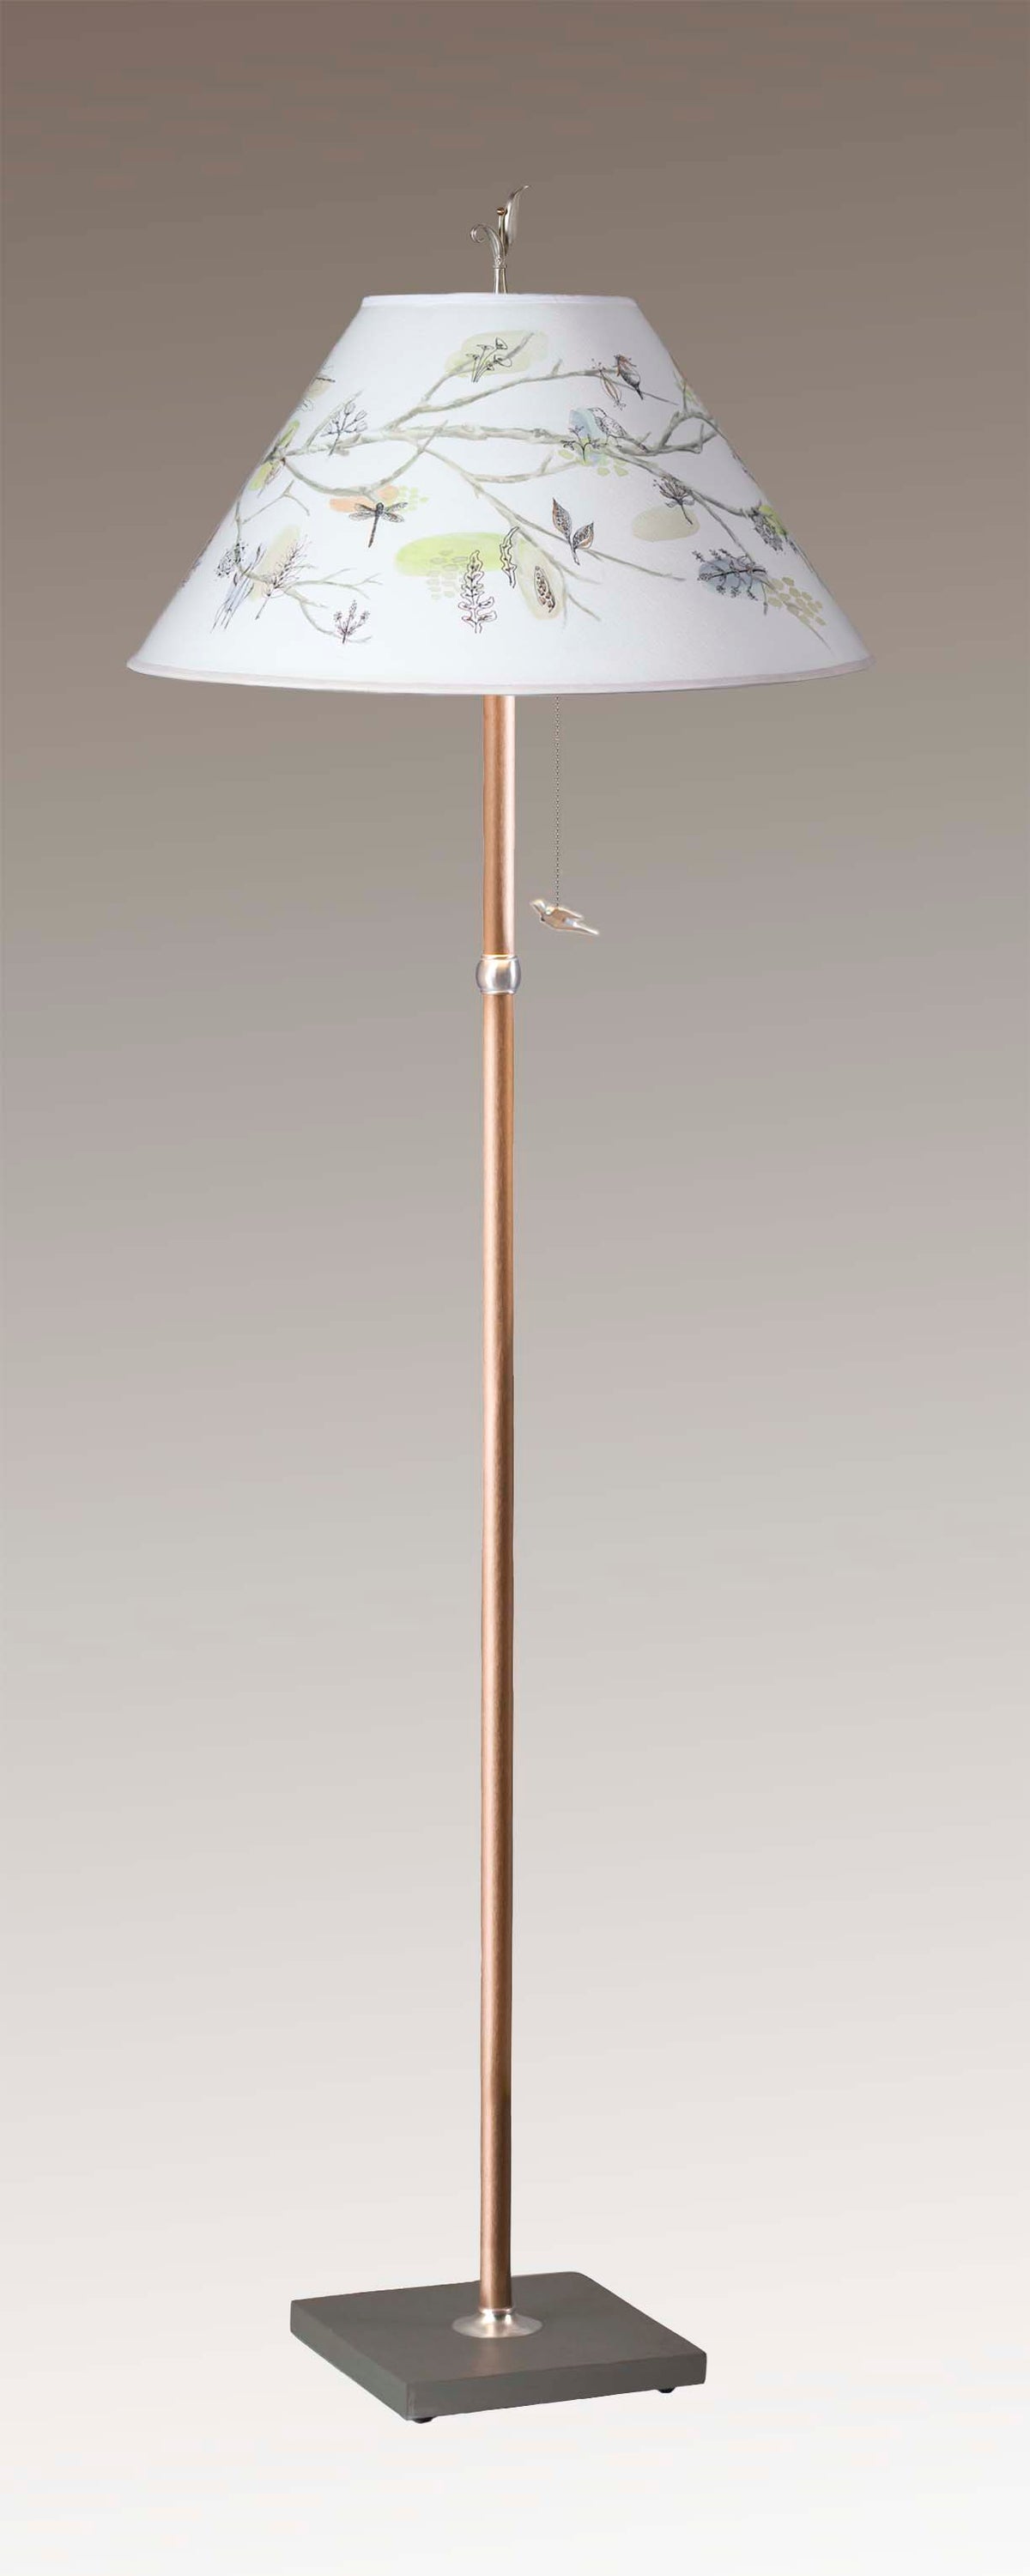 Janna Ugone &amp; Co Floor Lamps Copper Floor Lamp with Large Conical Shade in Artful Branch